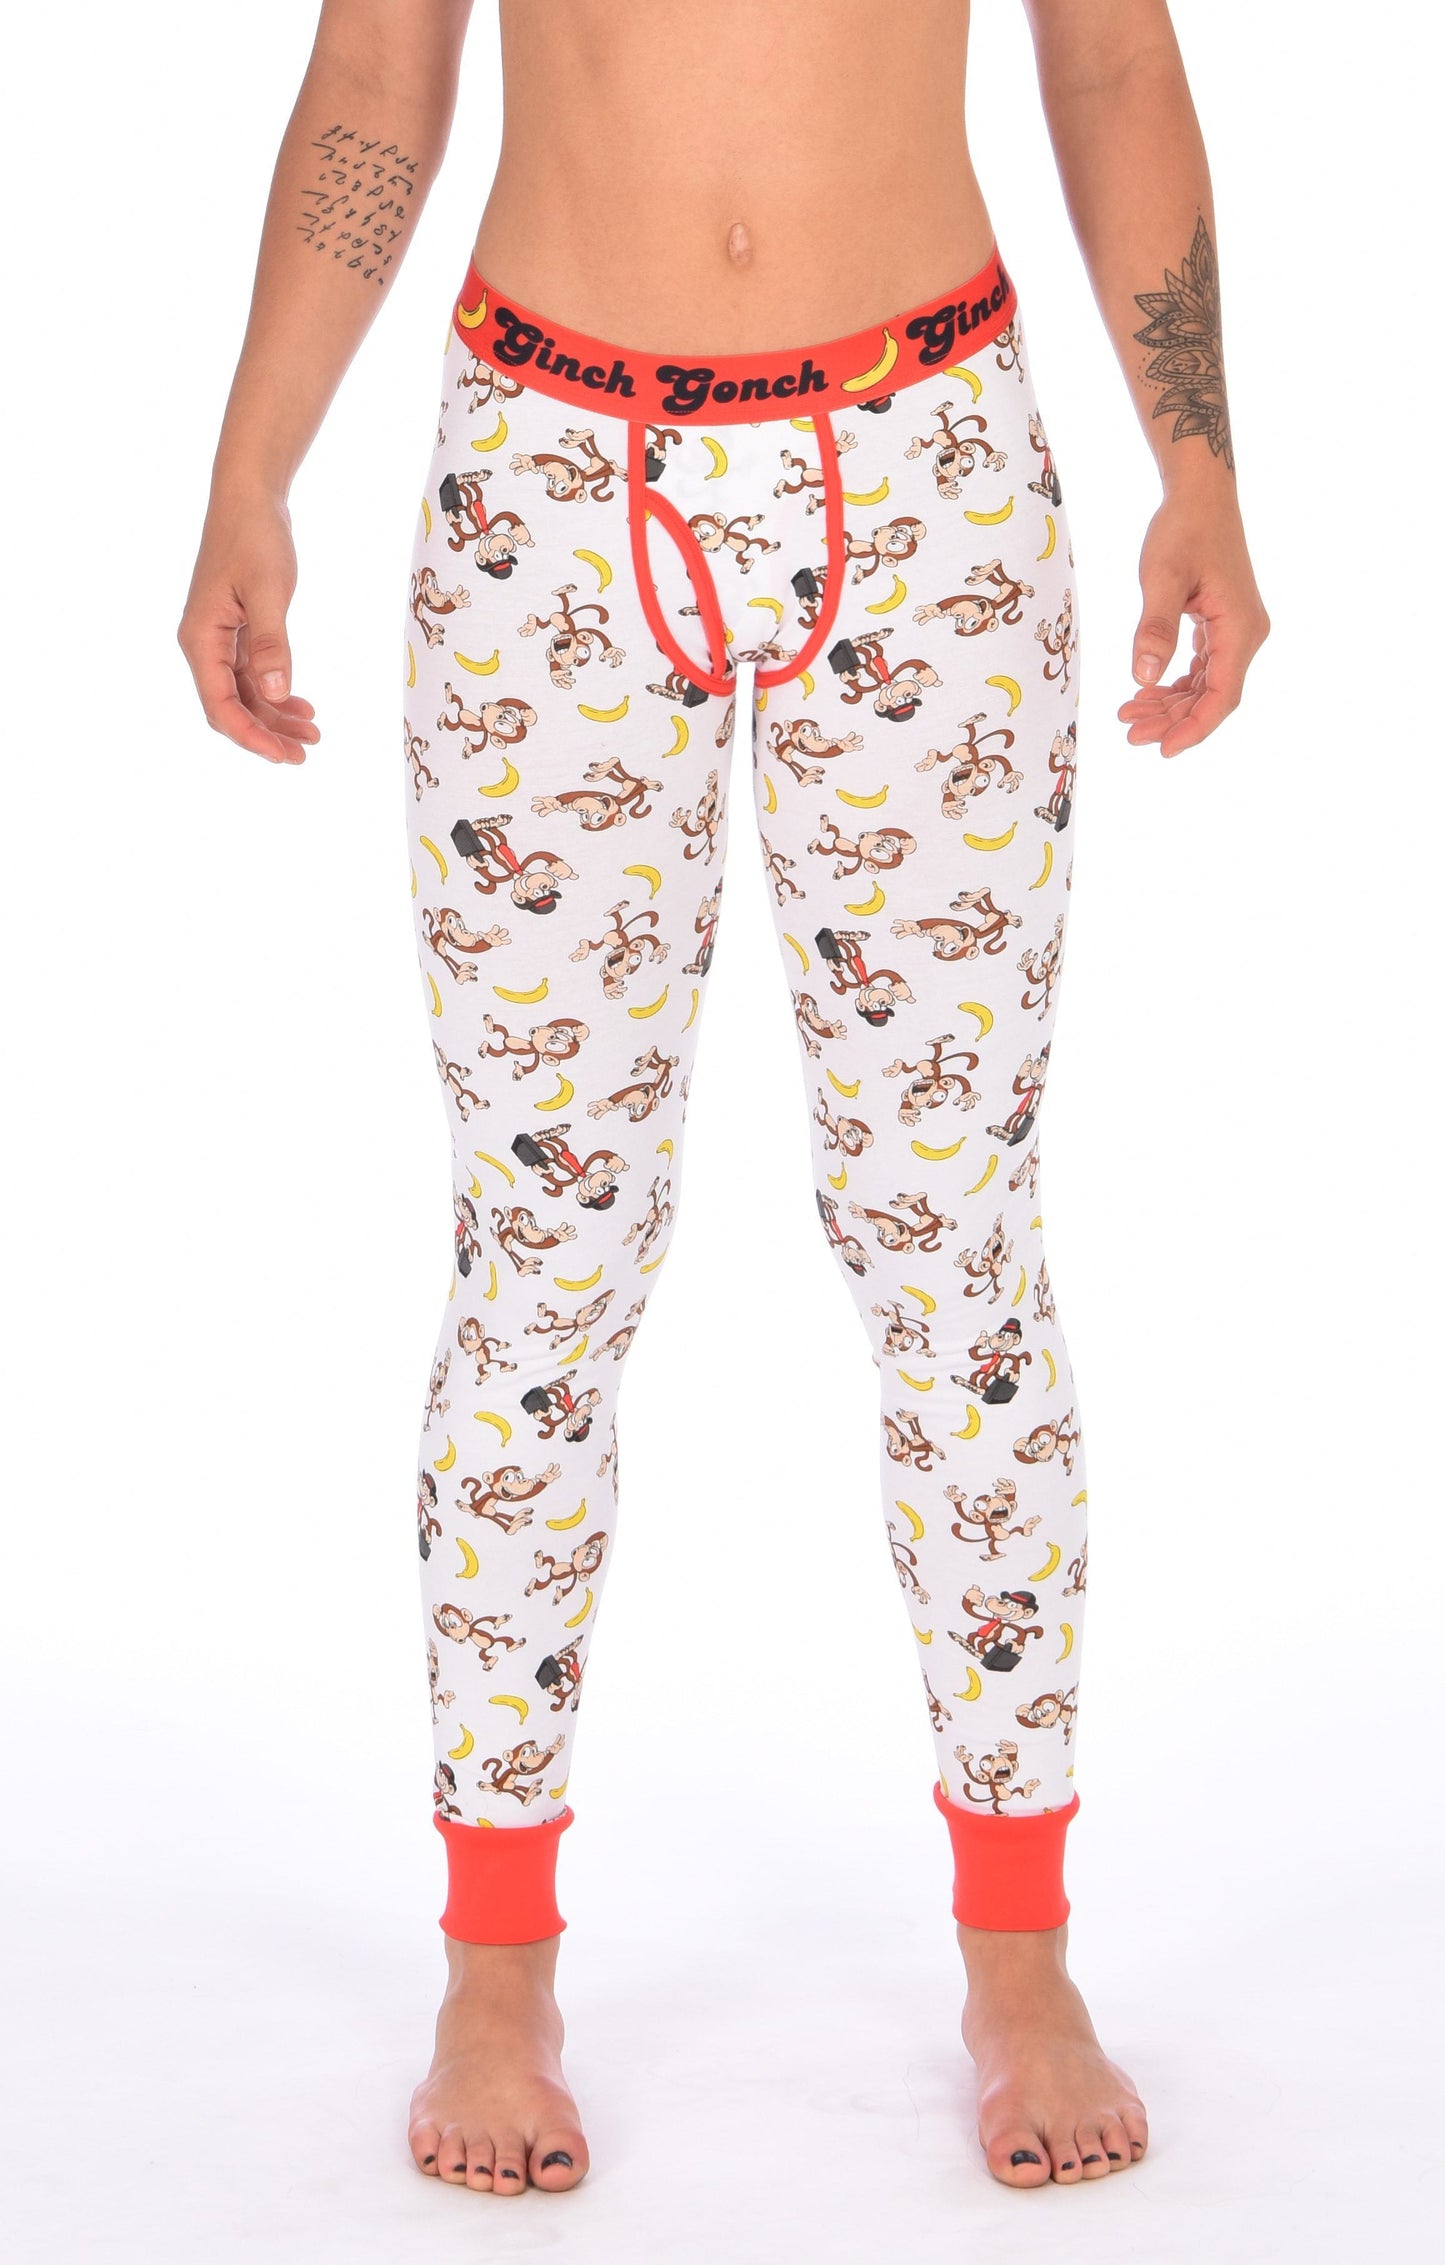 GG Ginch Gonch Gone Bananas leggings long johns men's long underwear white fabric with monkeys and bananas red trim and red printed waistband y front